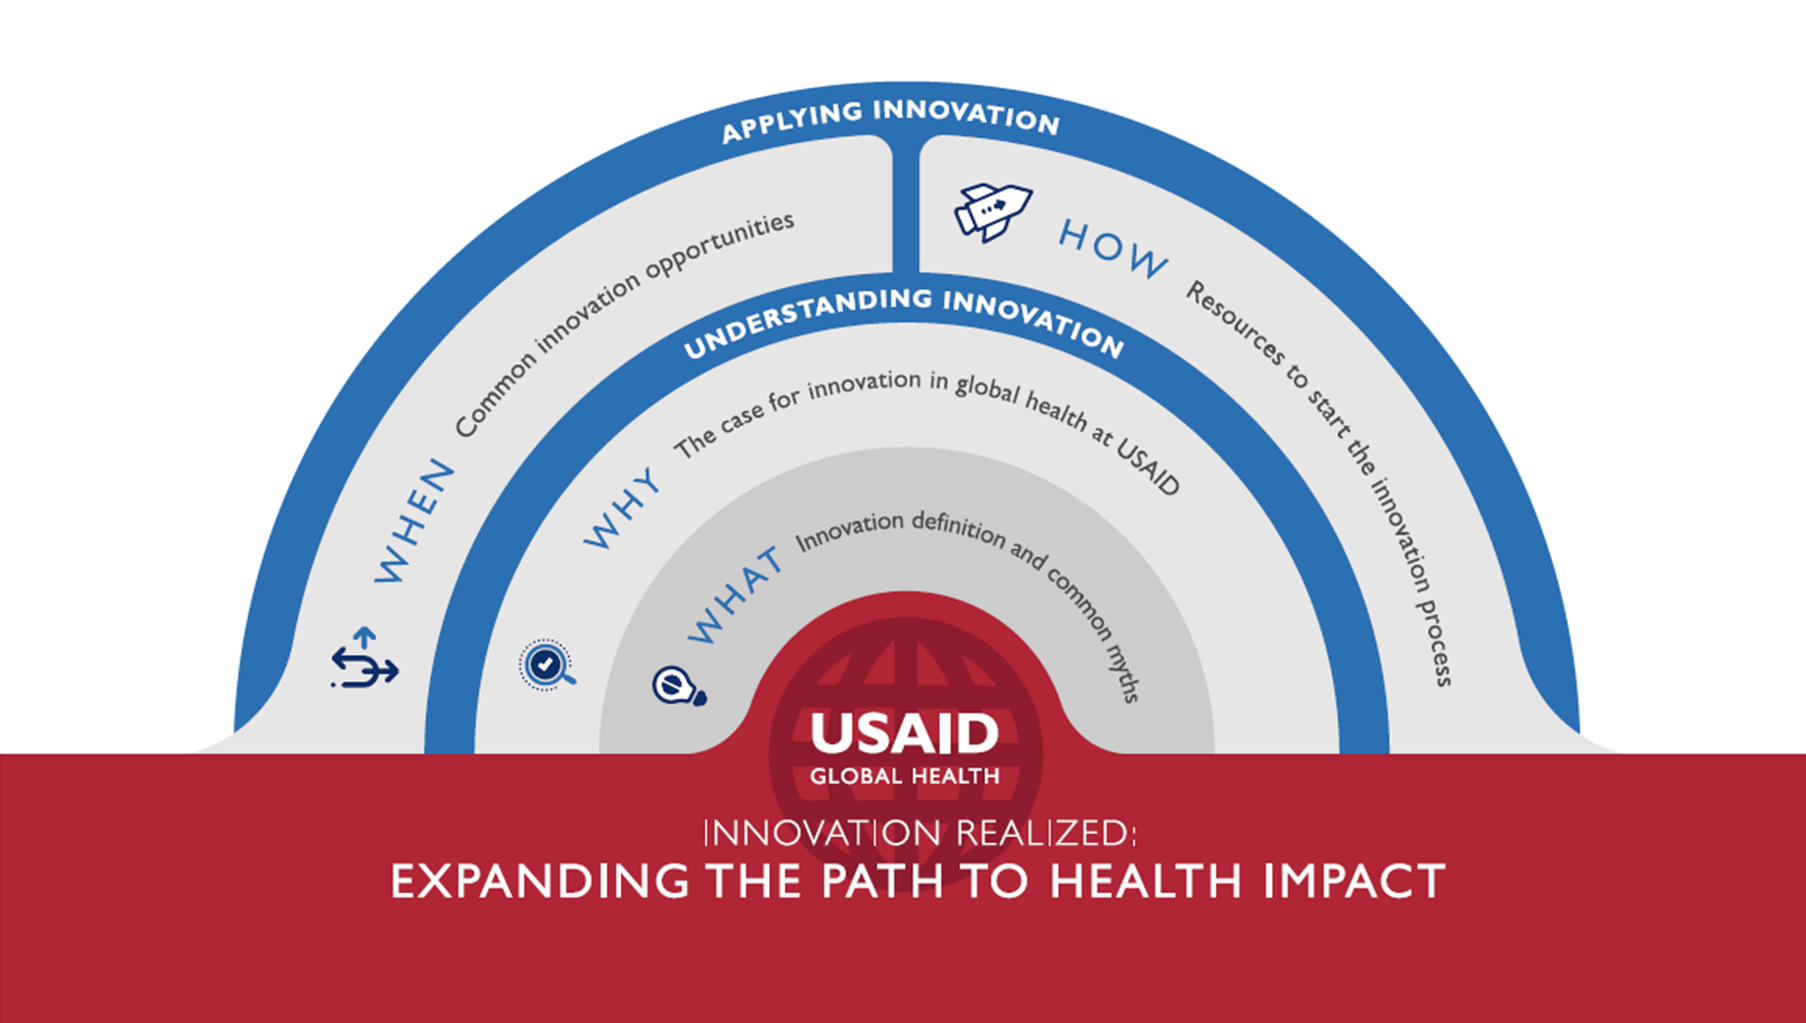 Innovation Realized: Expanding the Path to Health Impact